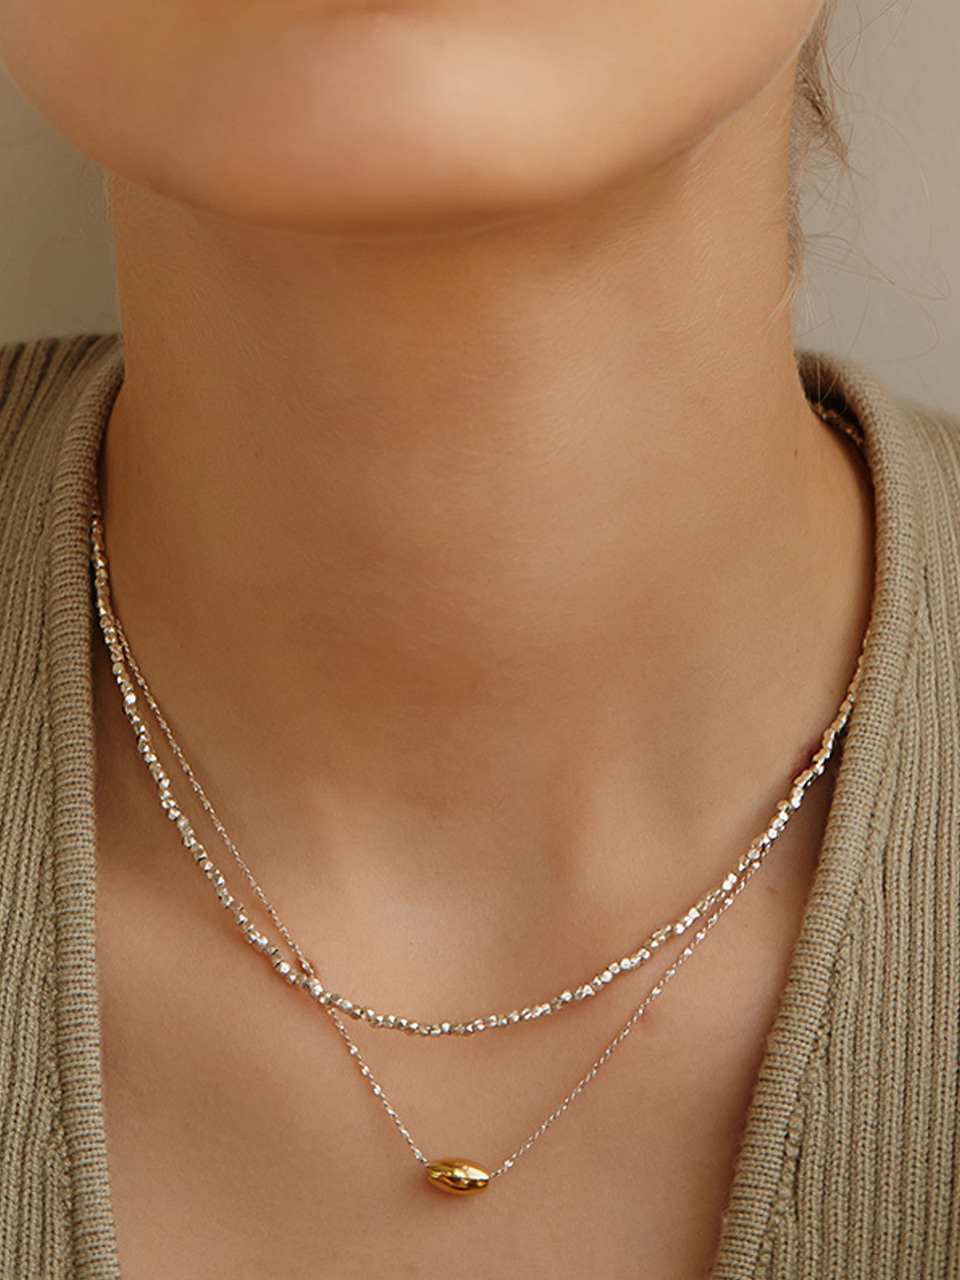 [silver925]concise oval necklace